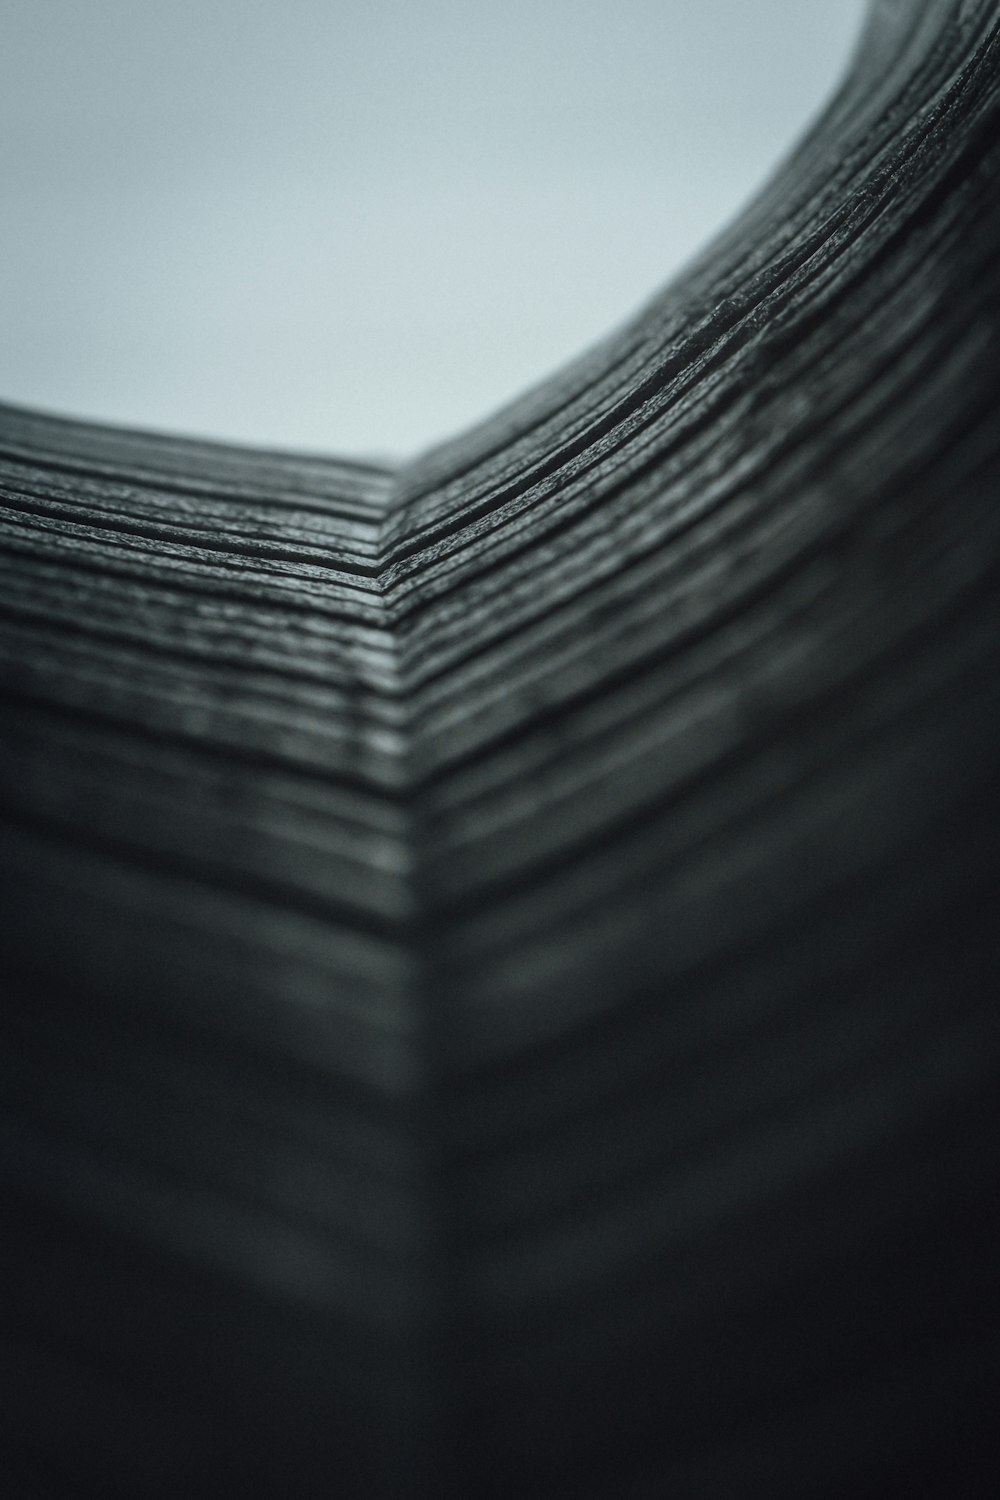 a close up of a book with lines on it